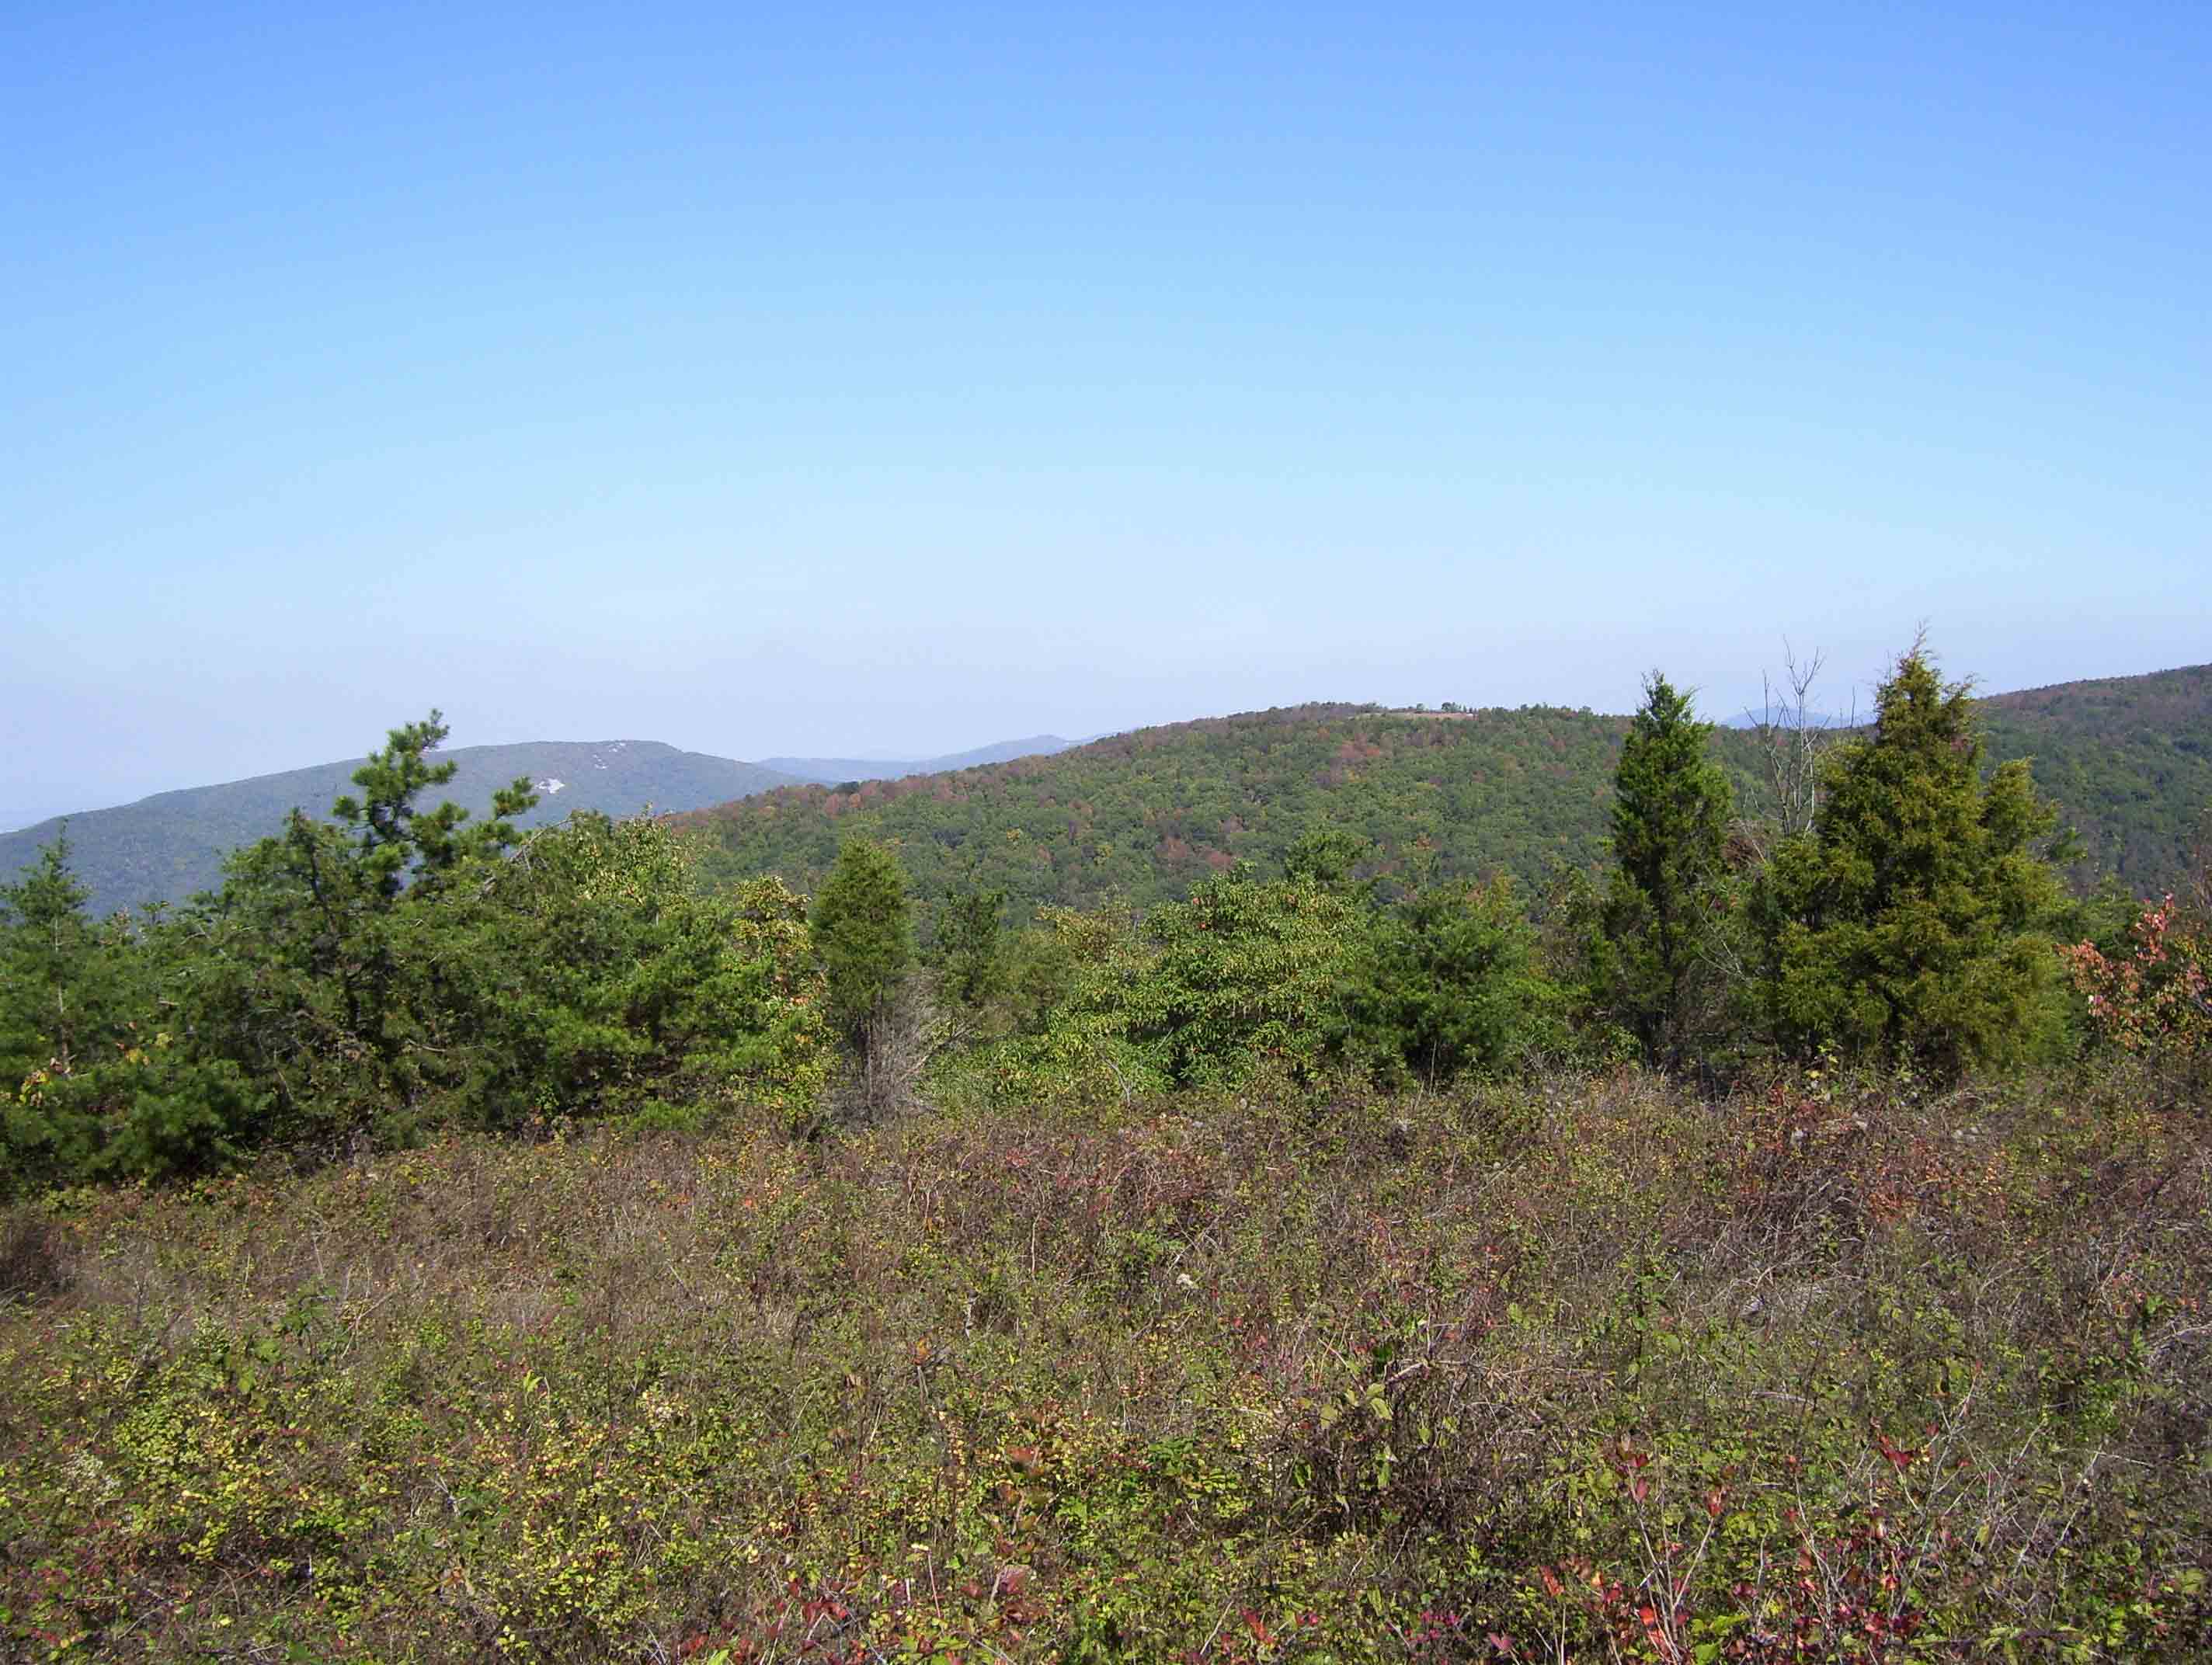 mm 3.7 - View north from near the summit of Bears Den Mt.  Courtesy dlcul@conncoll.edu